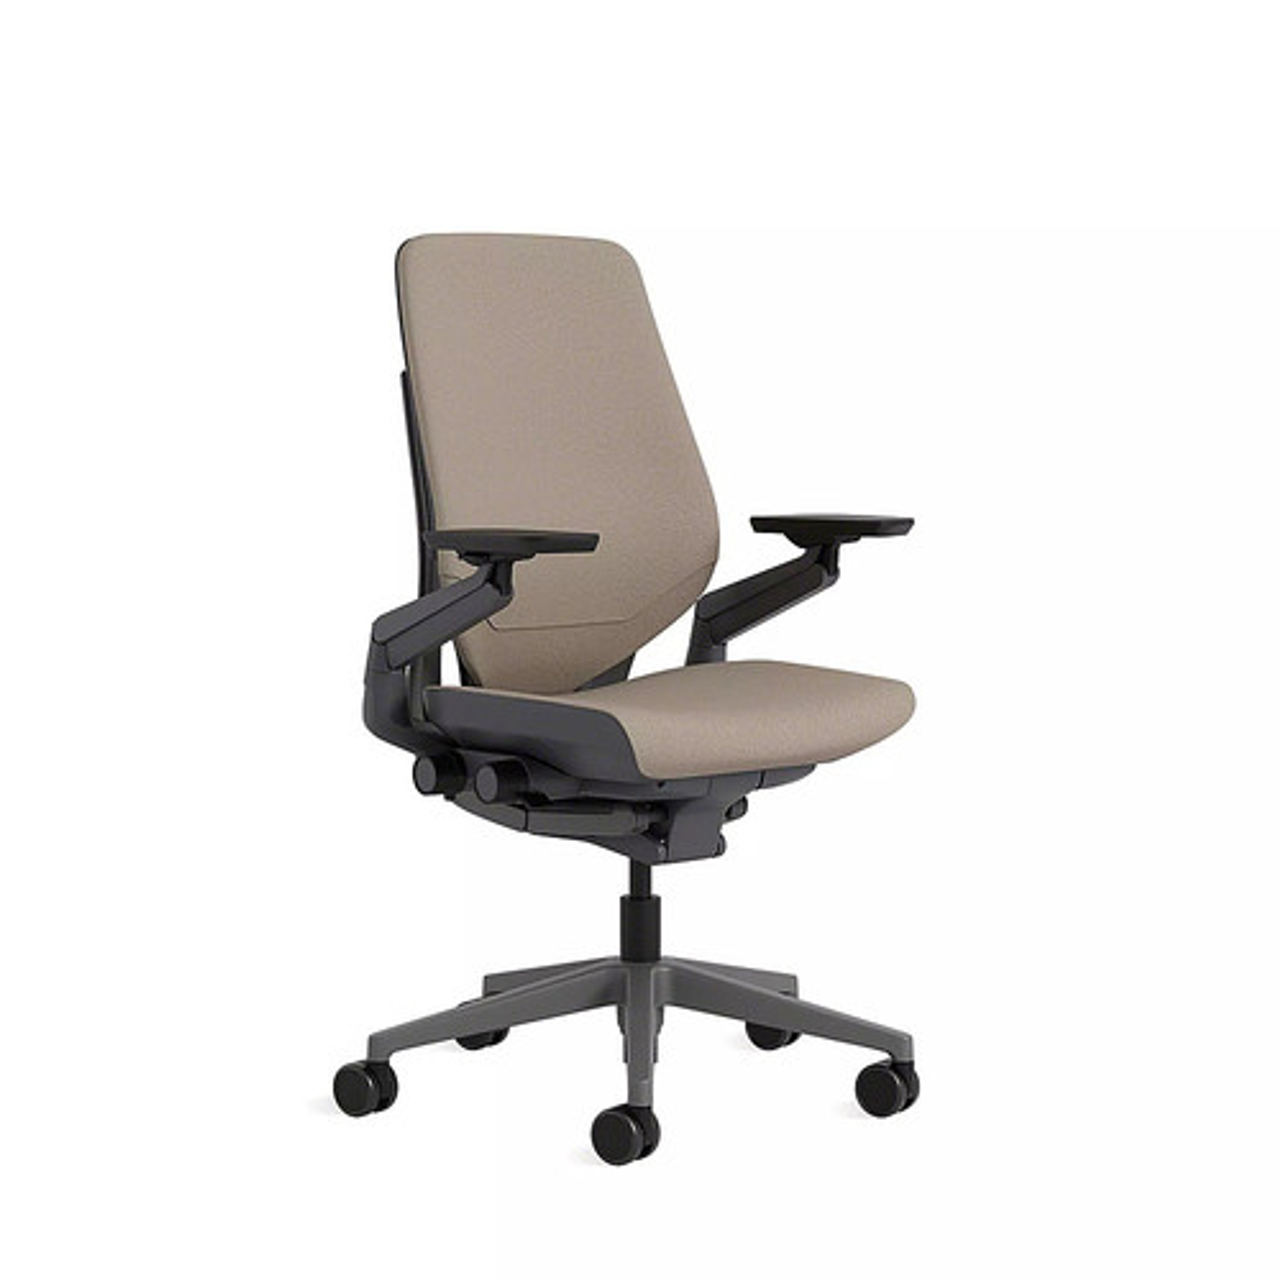 Steelcase - Gesture Shell Back Office Chair in Oatmeal Fabric with Hard Casters